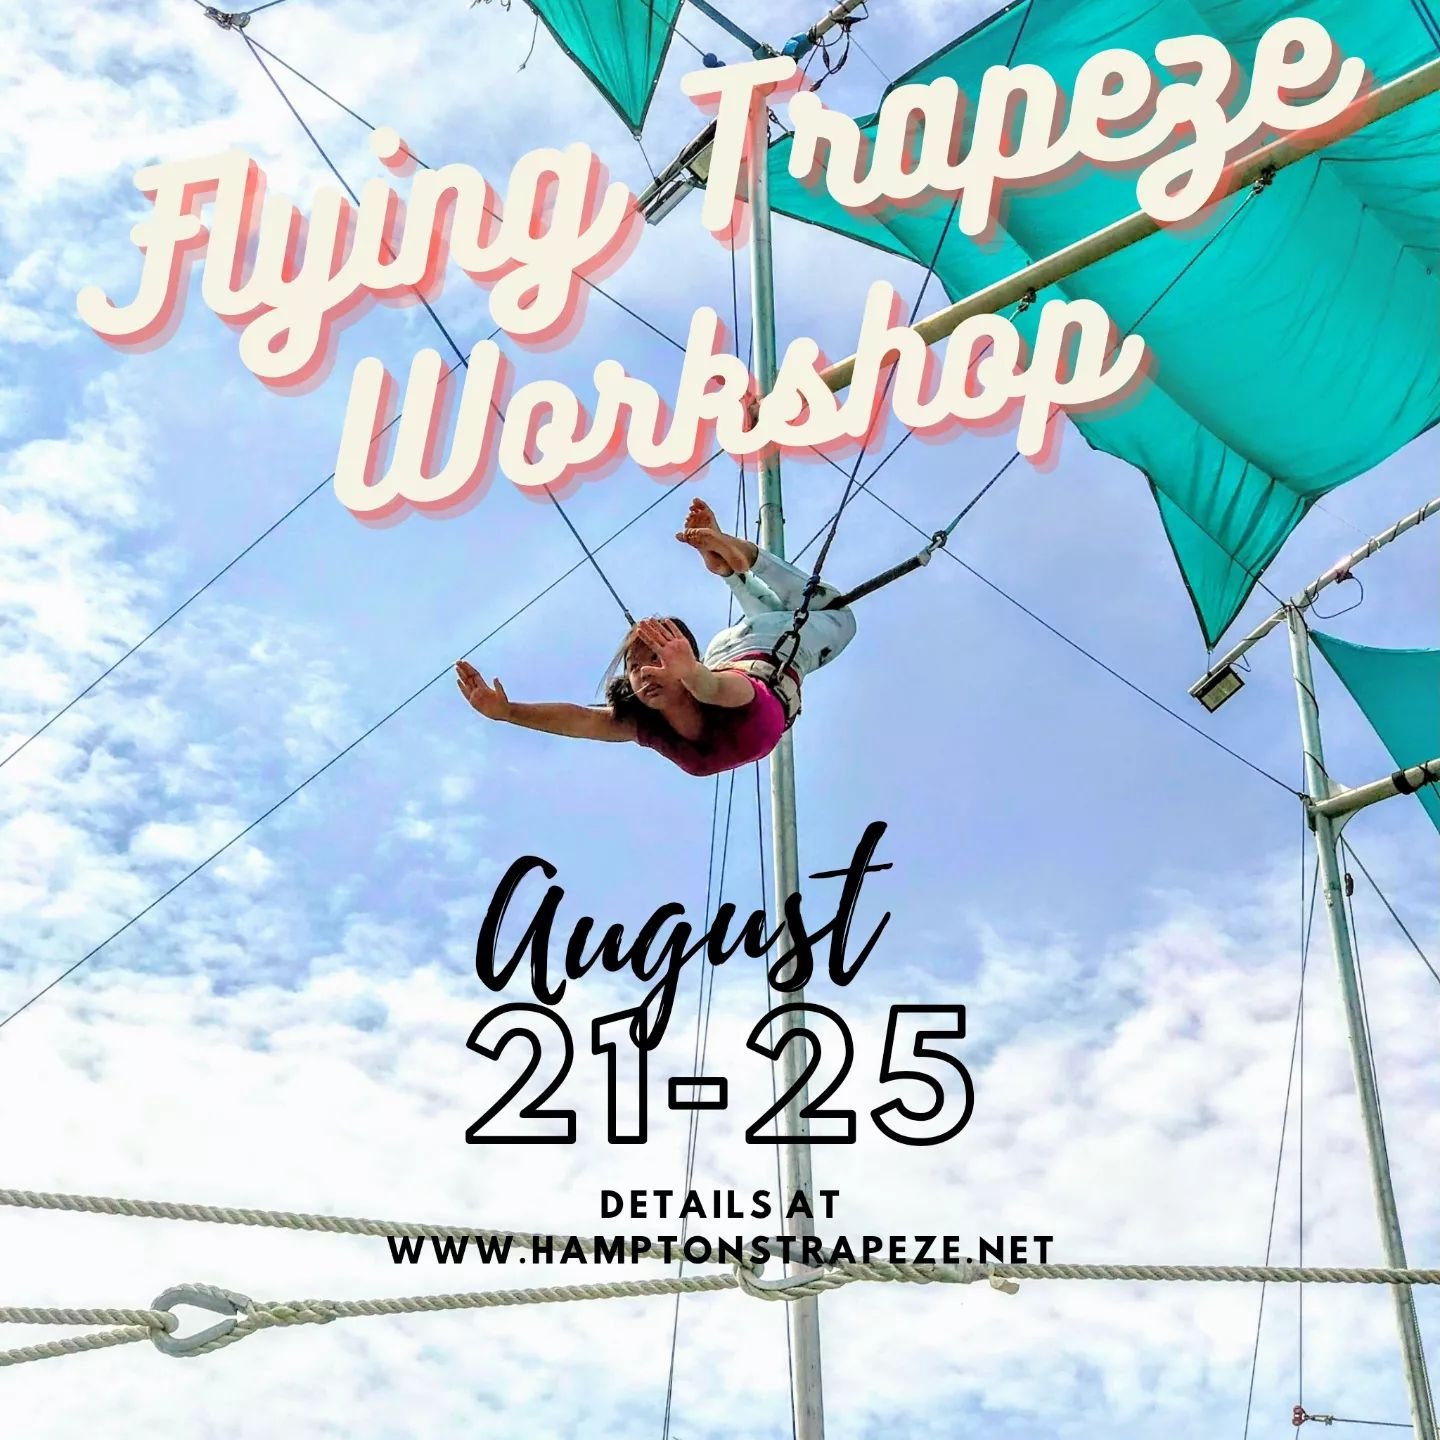 Our Intensive Flying Trapeze Workshop is filling up fast, but spots are still available! Work your favorite tricks, and perform for your friends and family in a showcase on the 25th!

Secure your spot today, and fly like the pros!

#flyingtrapeze #ci